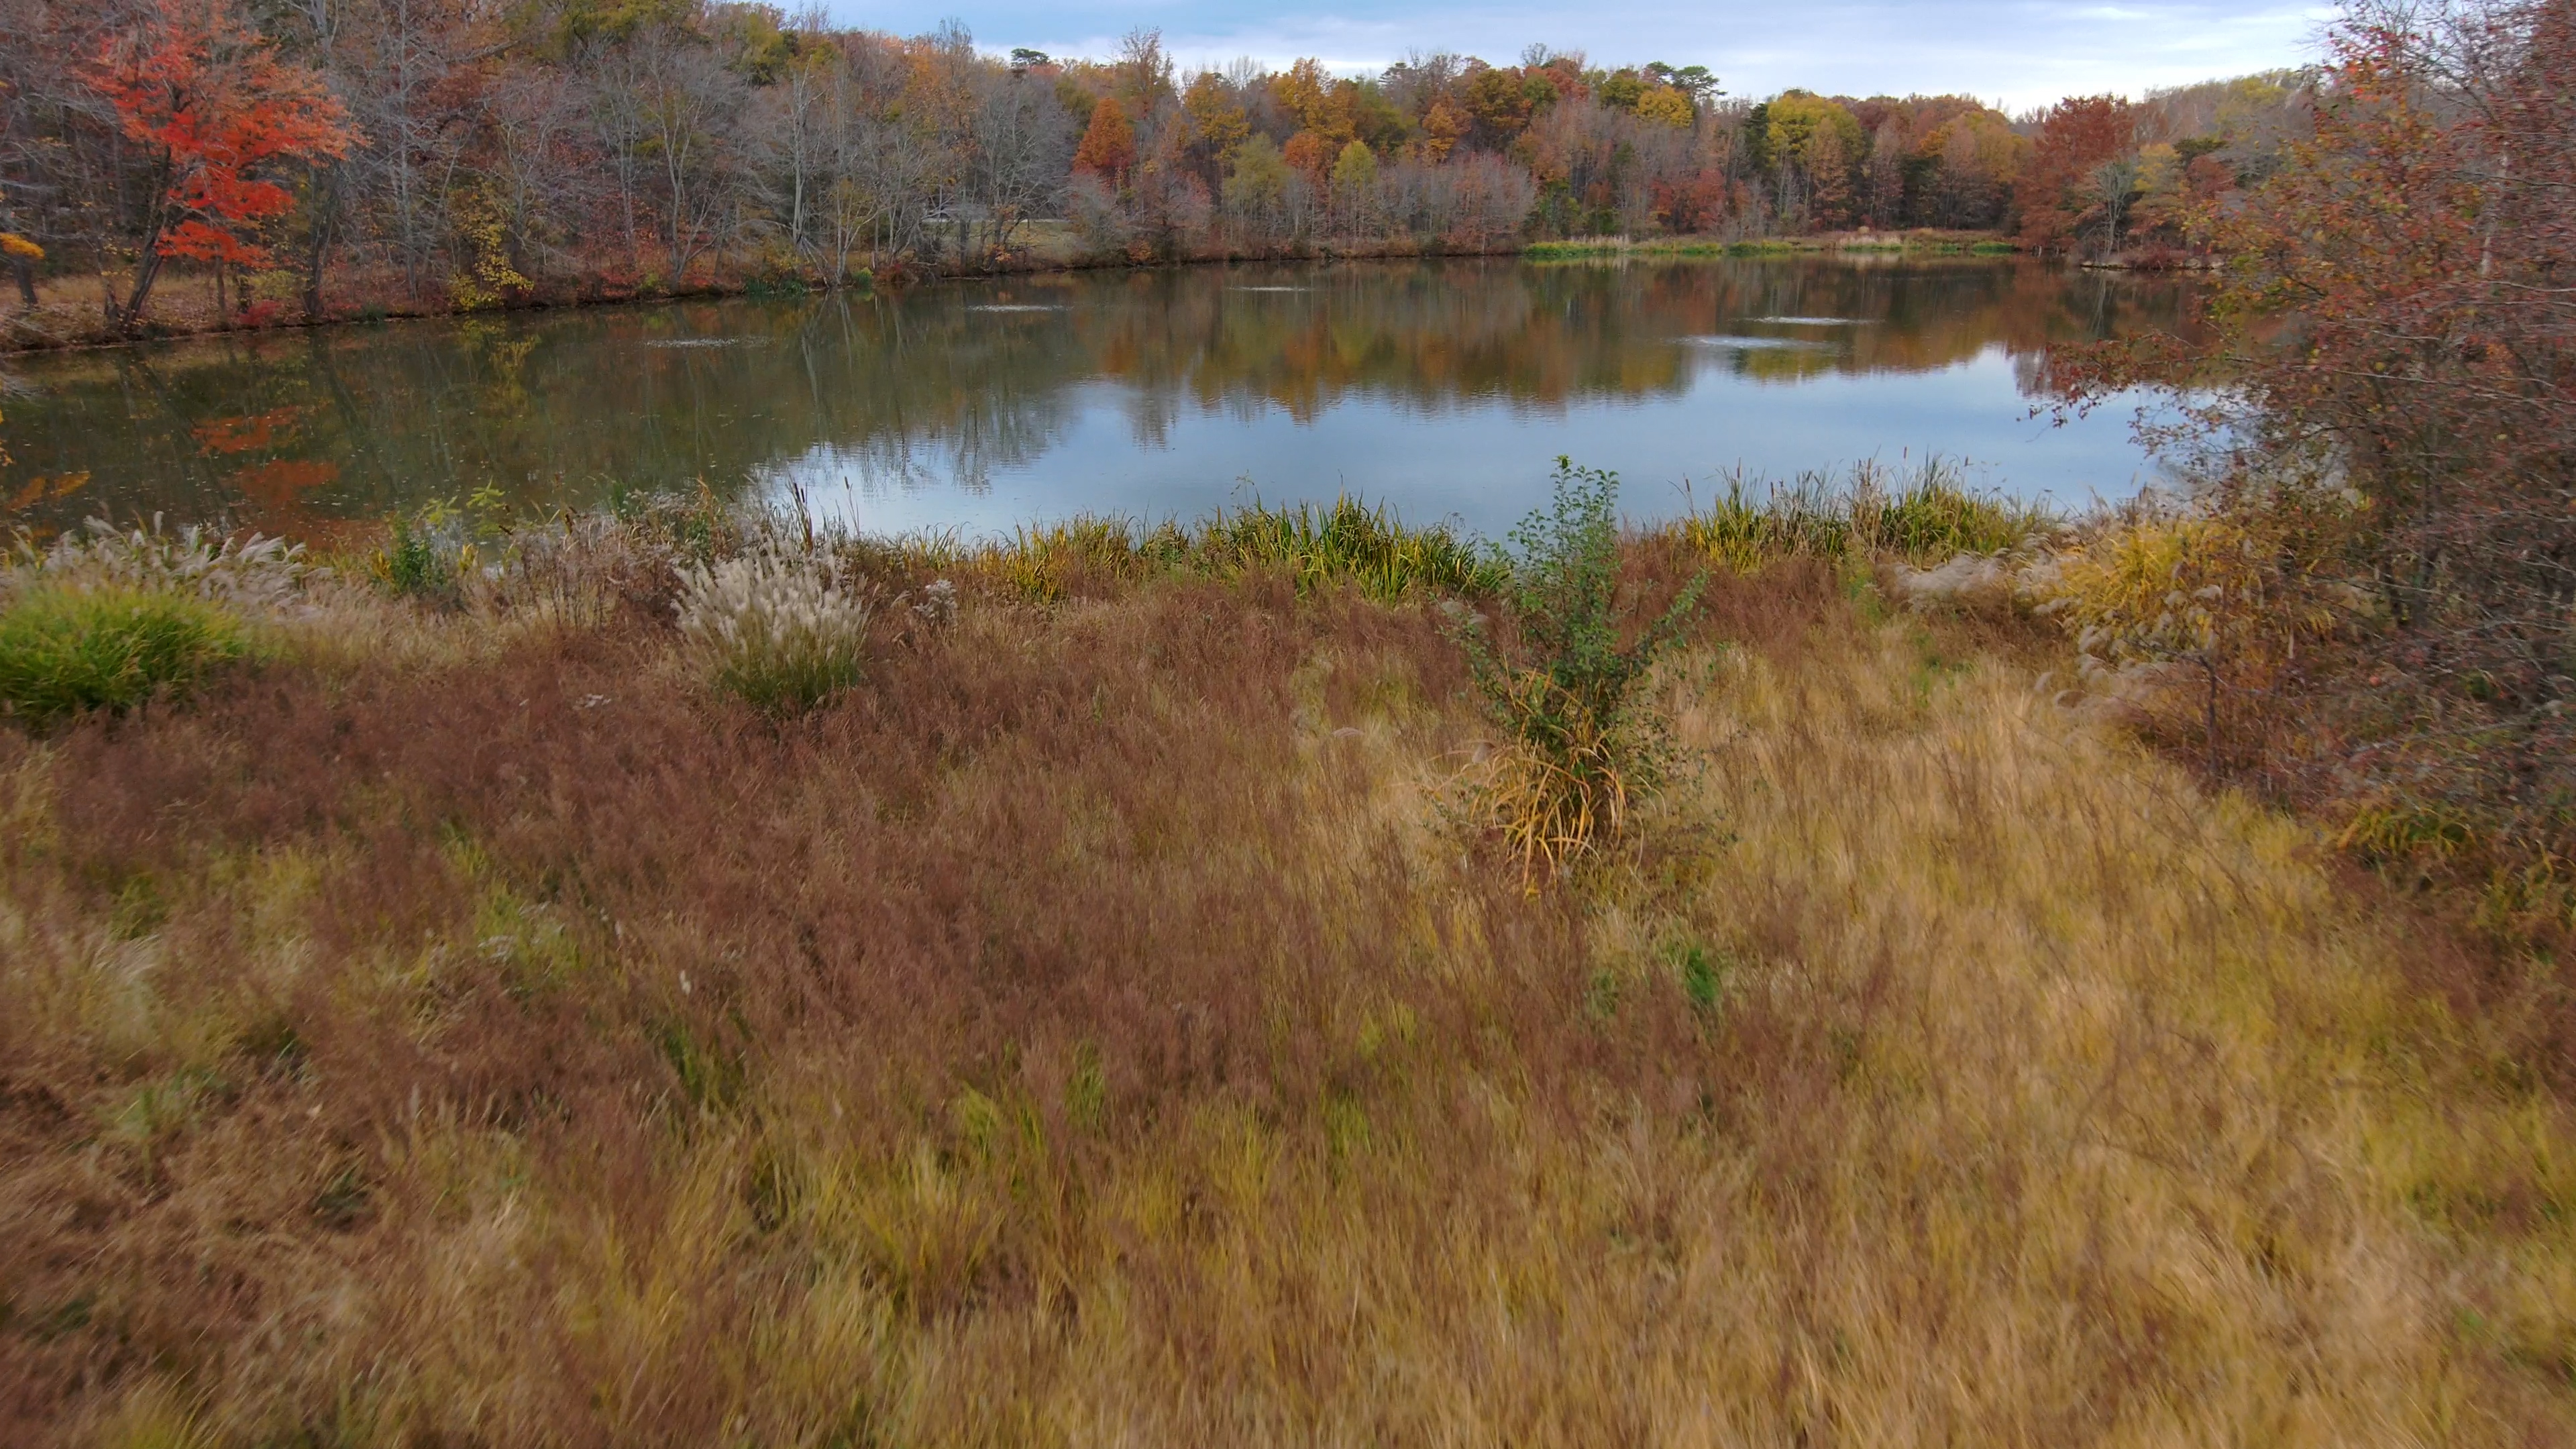 Views in the vicinity of the pond and wooded area in the northwest of Goddard's campus. The first sequence is an ascent, followed by a  descent, looking northwest. The next clip flies horizontally across the pond at low altitude. The following clip transitions from a position just above the pond, flying southeast, and rises to reveal Buildings 20, 28, and the broader Goddard campus. The next shot flies the same path in reverse at slower speed. Credit: NASA/Francis Reddy